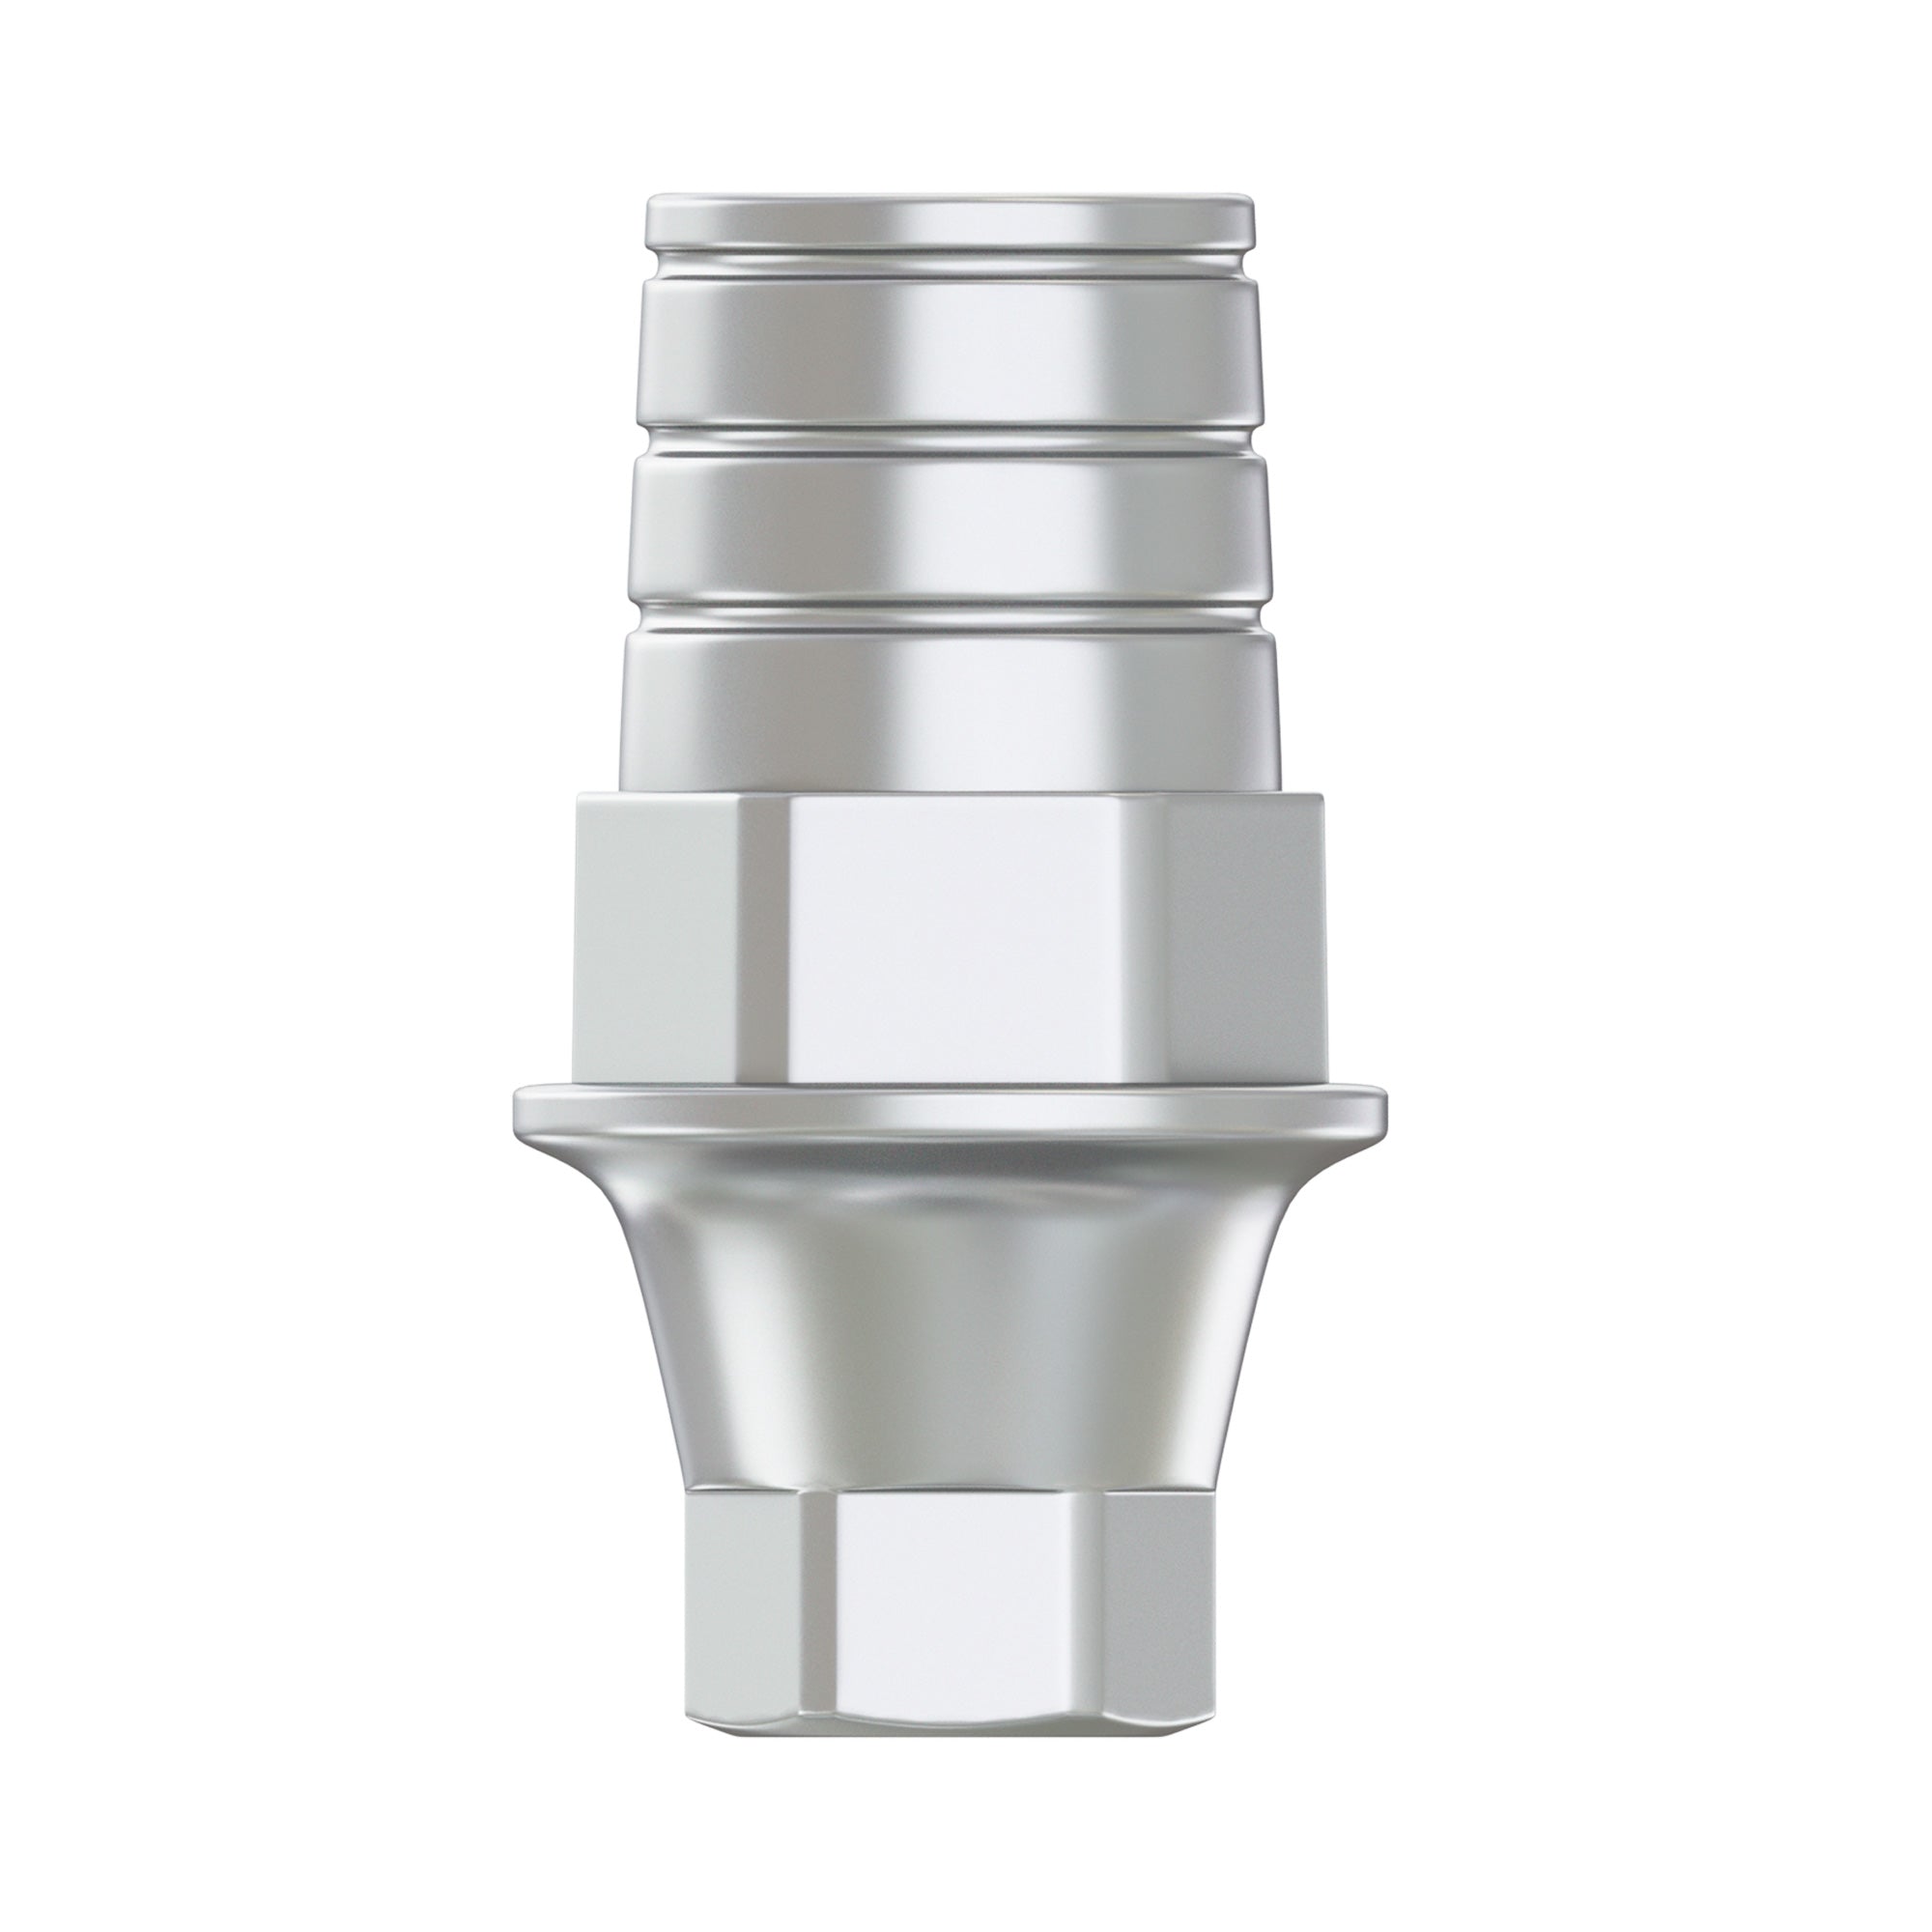 DSI Ti-Base CAD/CAM Abutment - 3.6mm - Conical Connection RP Ø4.3-5.0mm